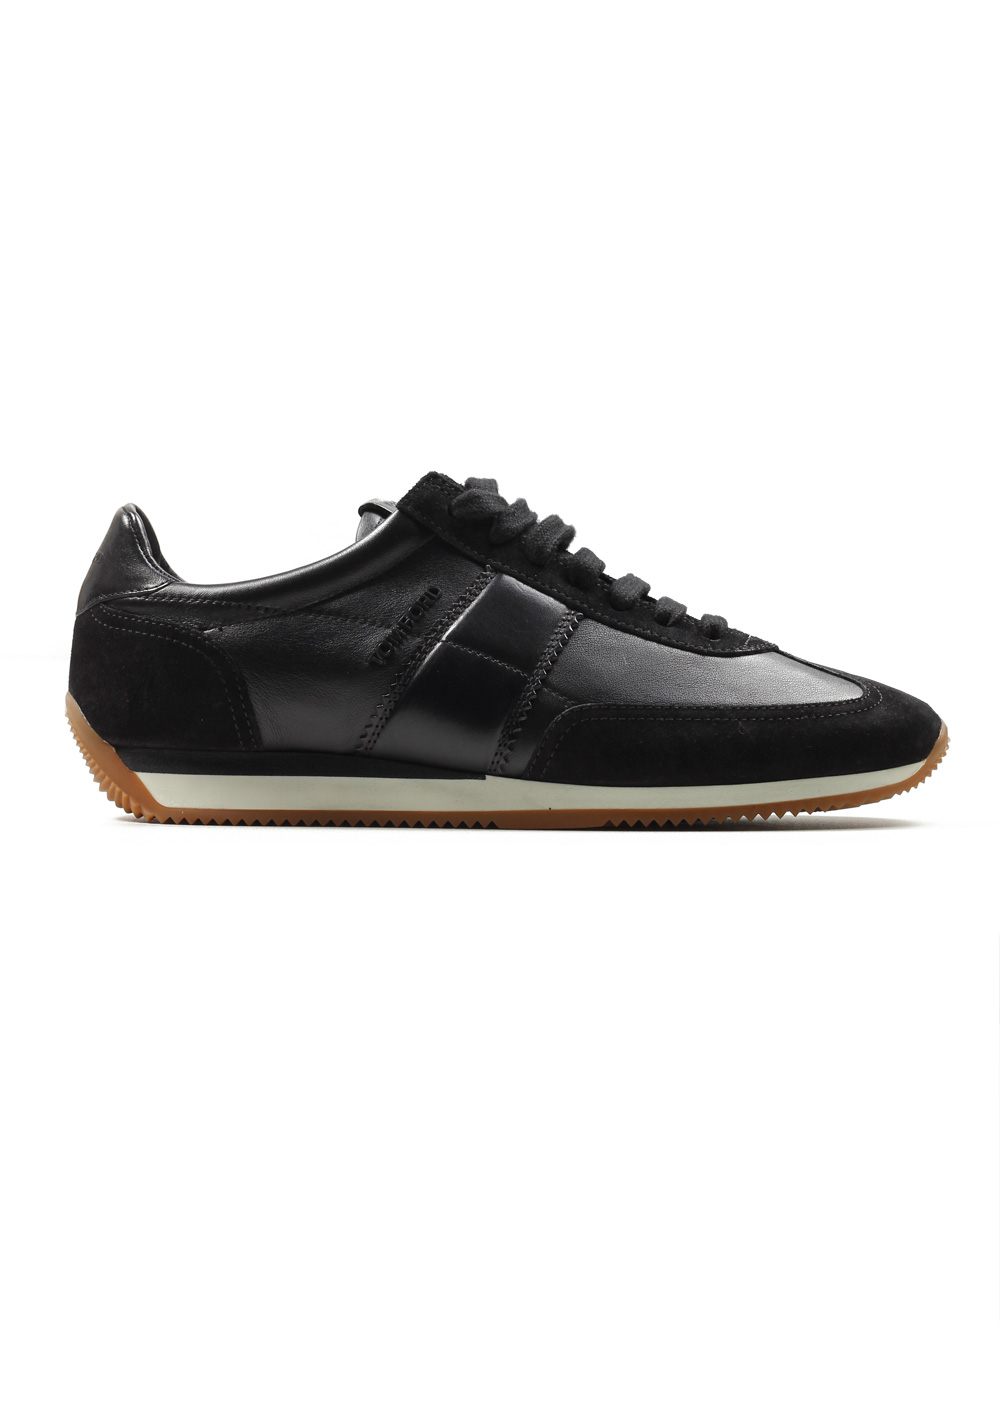 TOM FORD Orford Colorblock Suede Black Trainer Sneaker Shoes Size 8 UK / 9 U.S. | Costume Limité